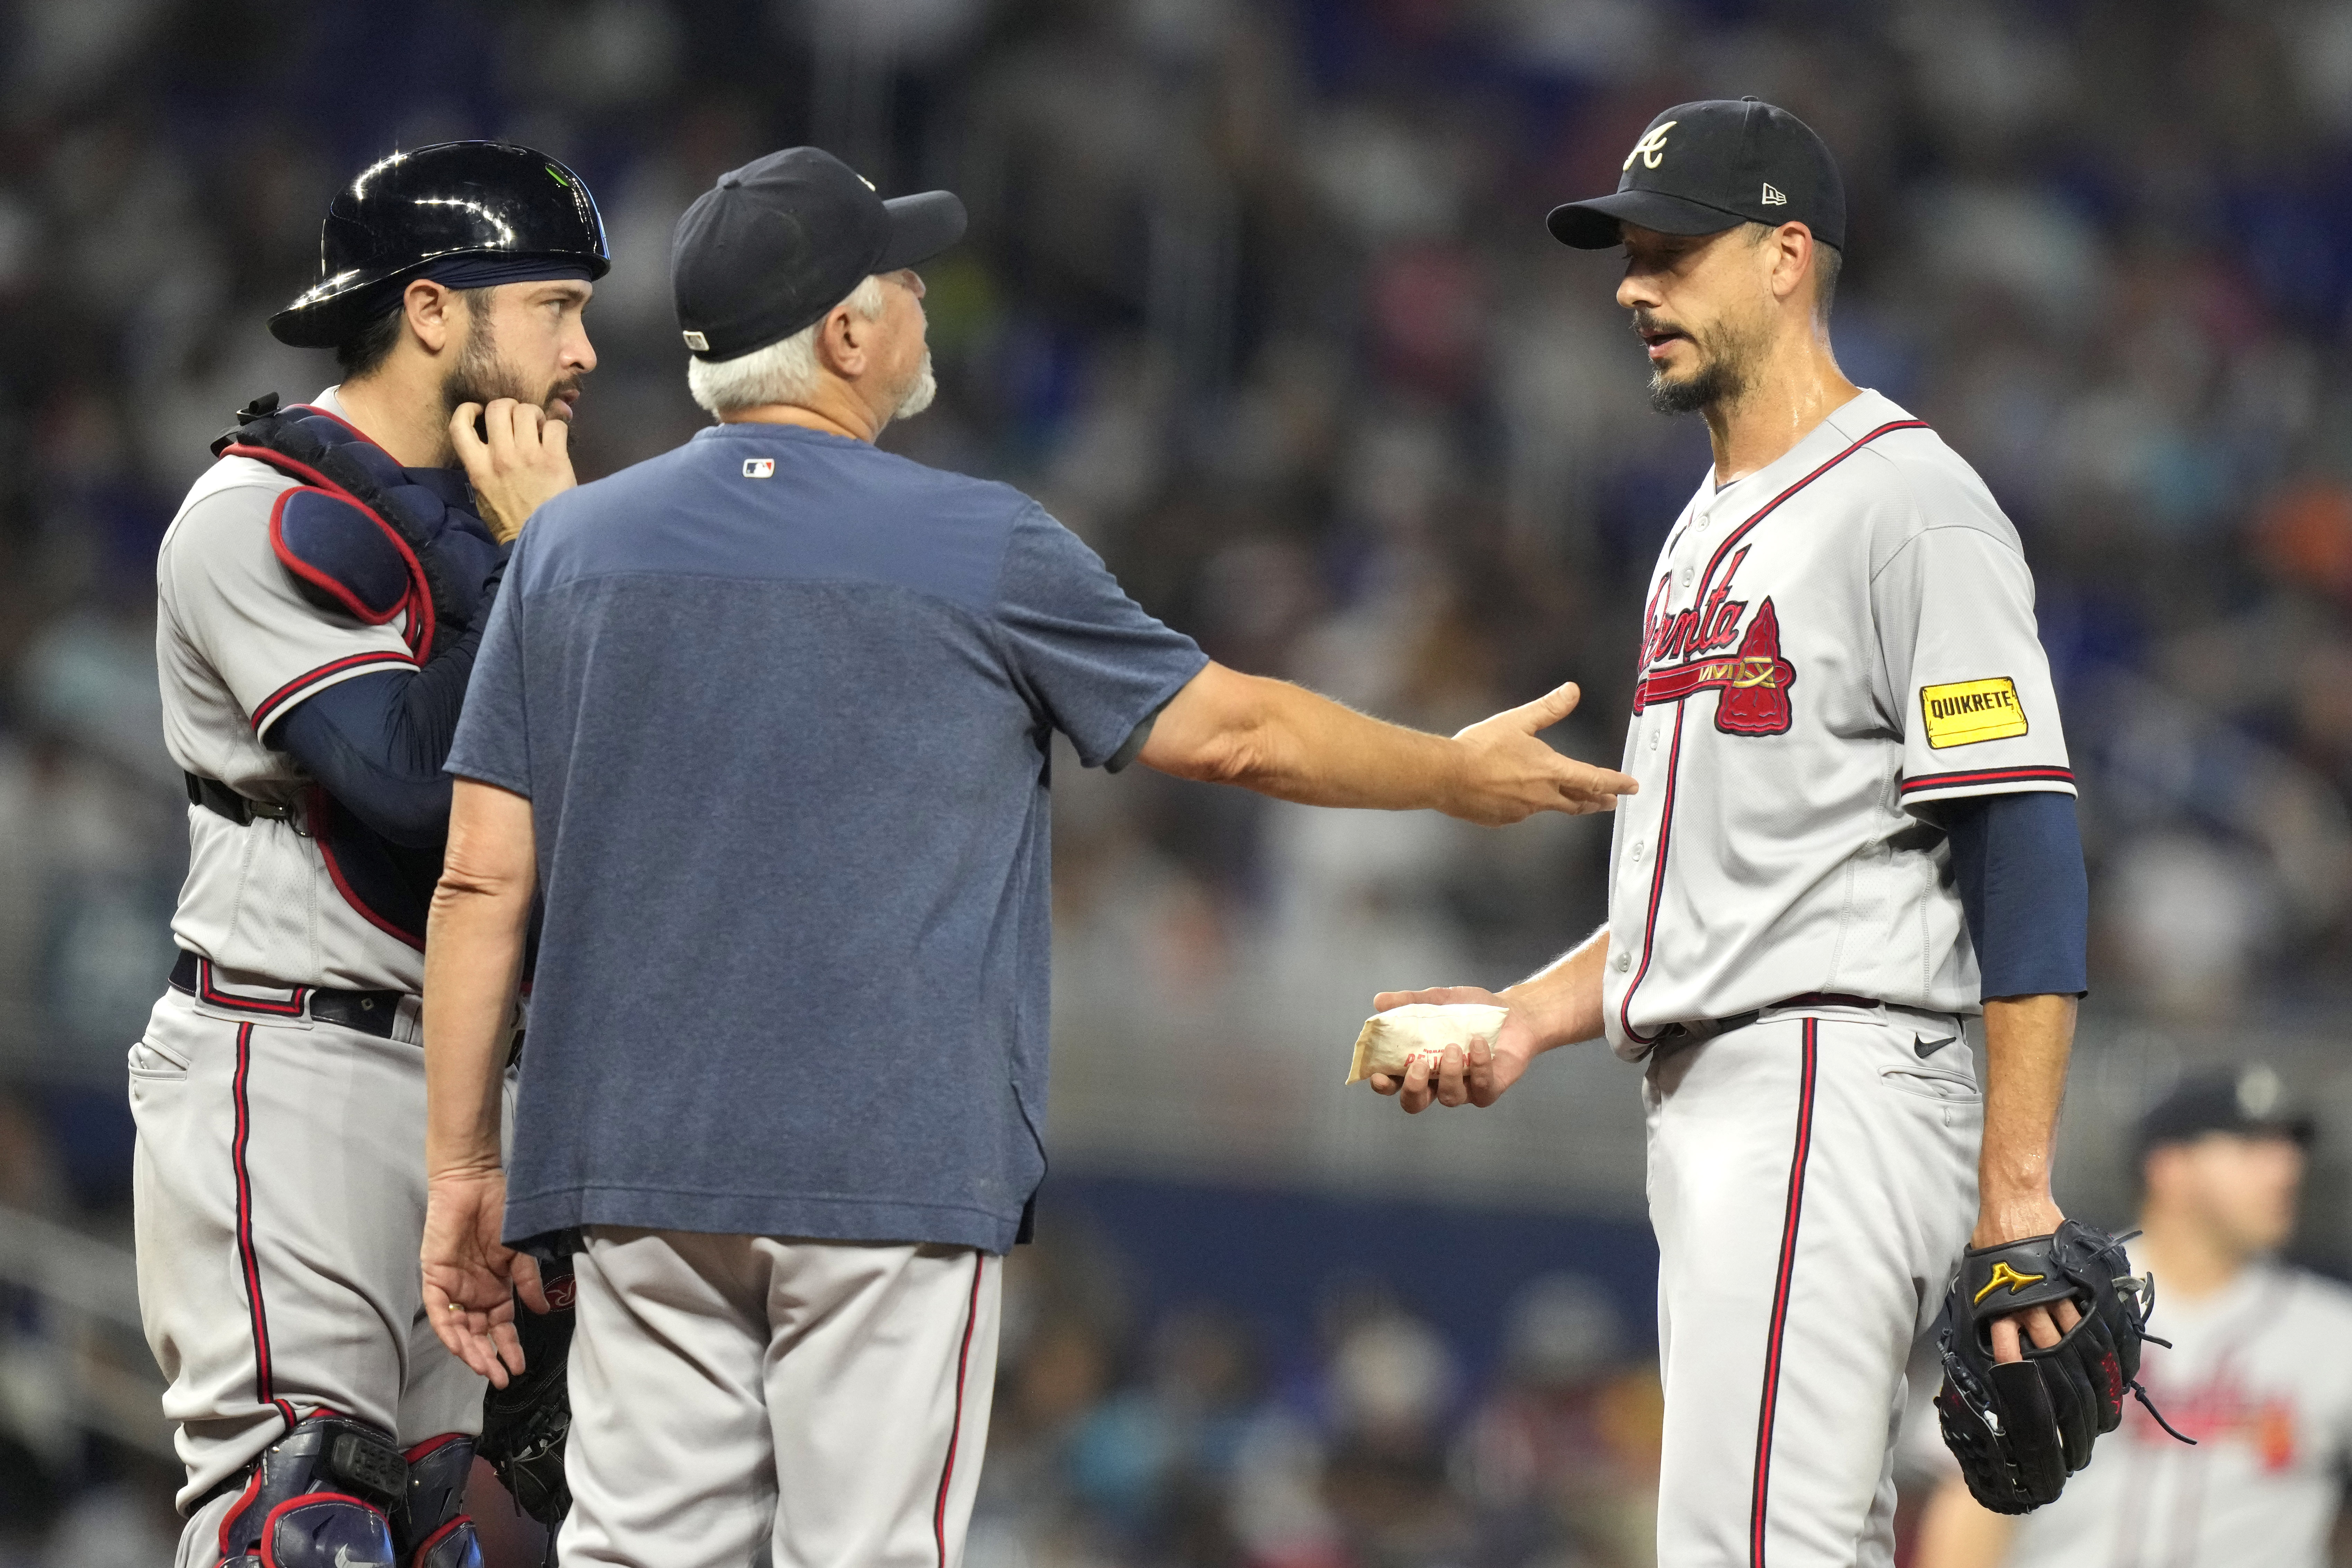 Braves pitching coach Rick Kranitz maintained positive vibe while